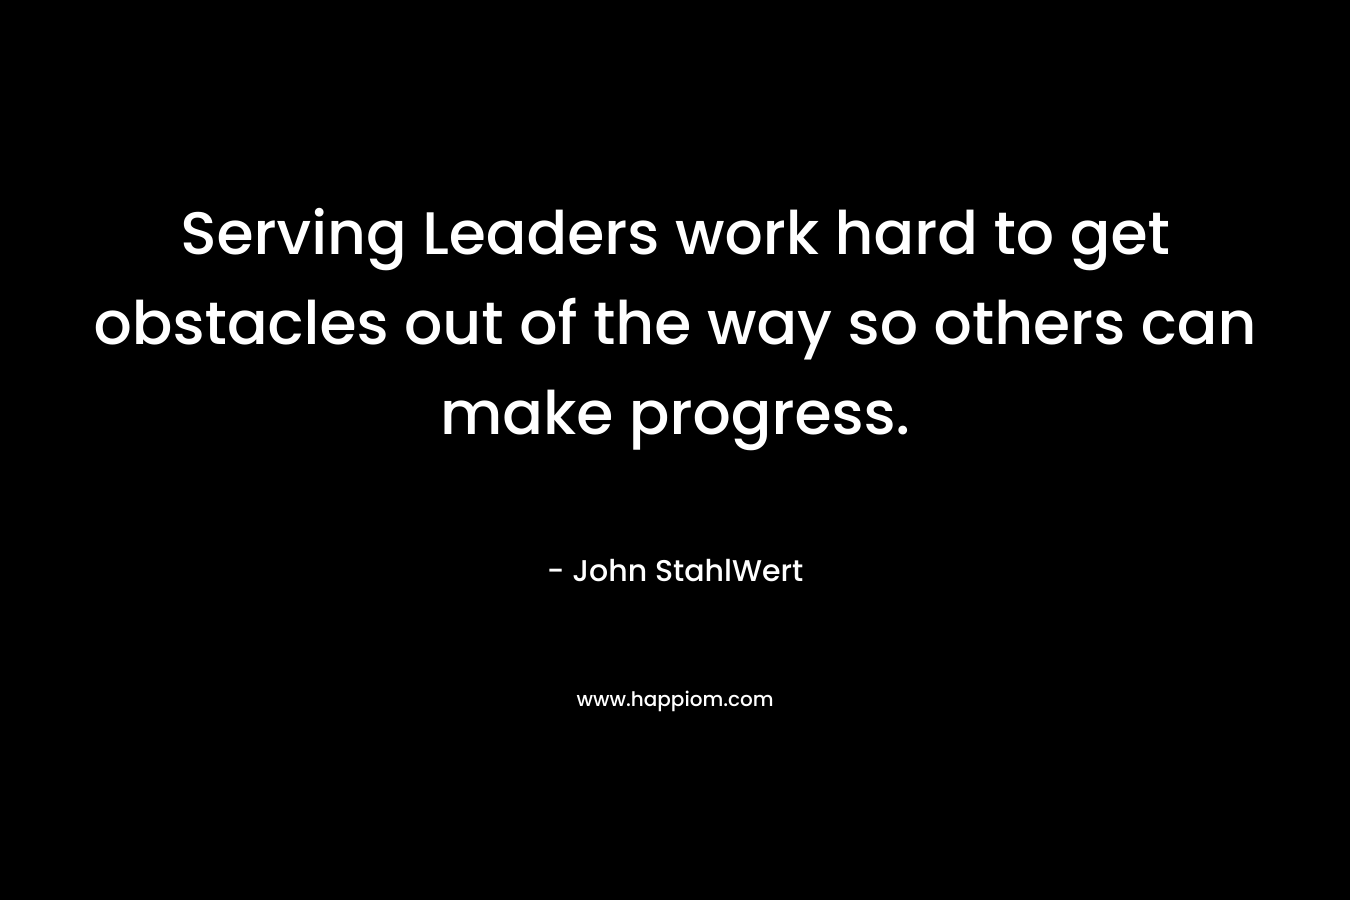 Serving Leaders work hard to get obstacles out of the way so others can make progress. – John StahlWert